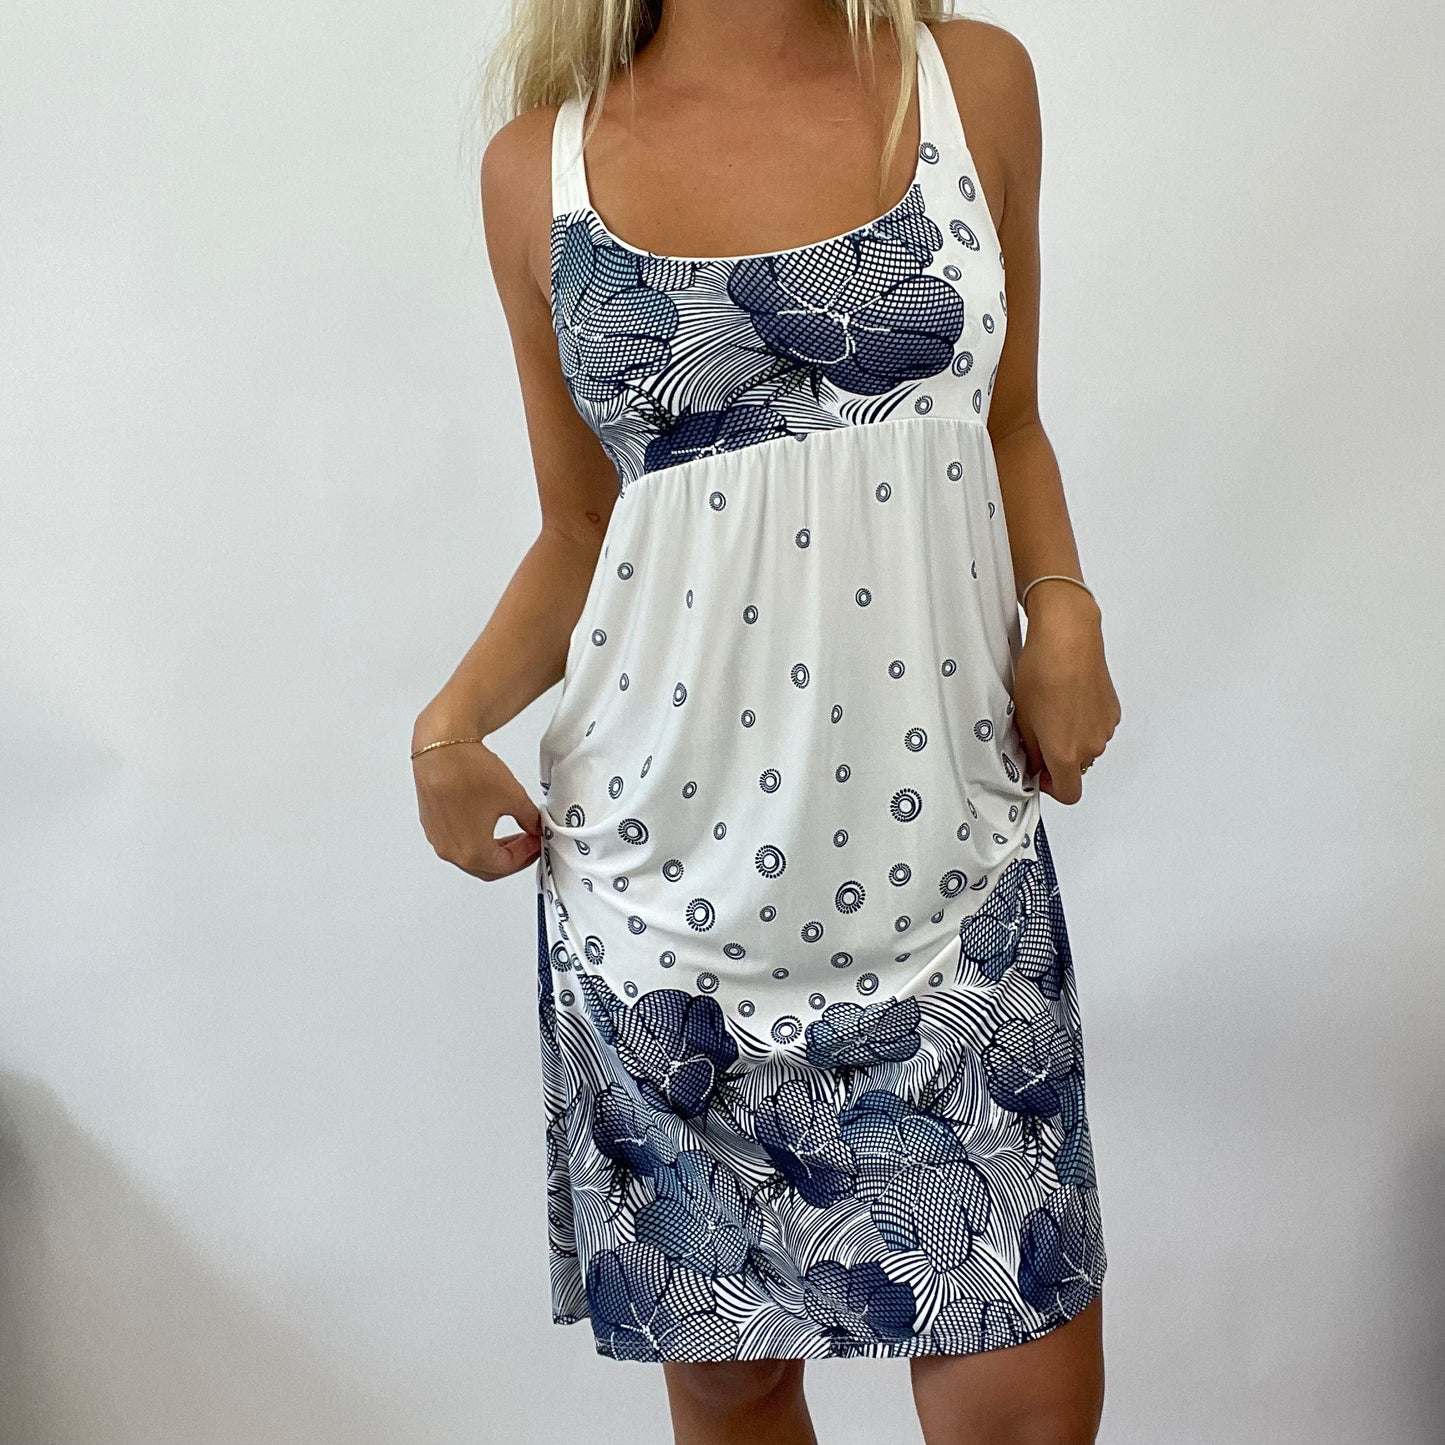 EUROPEAN SUMMER DROP | small white and blue floral dress